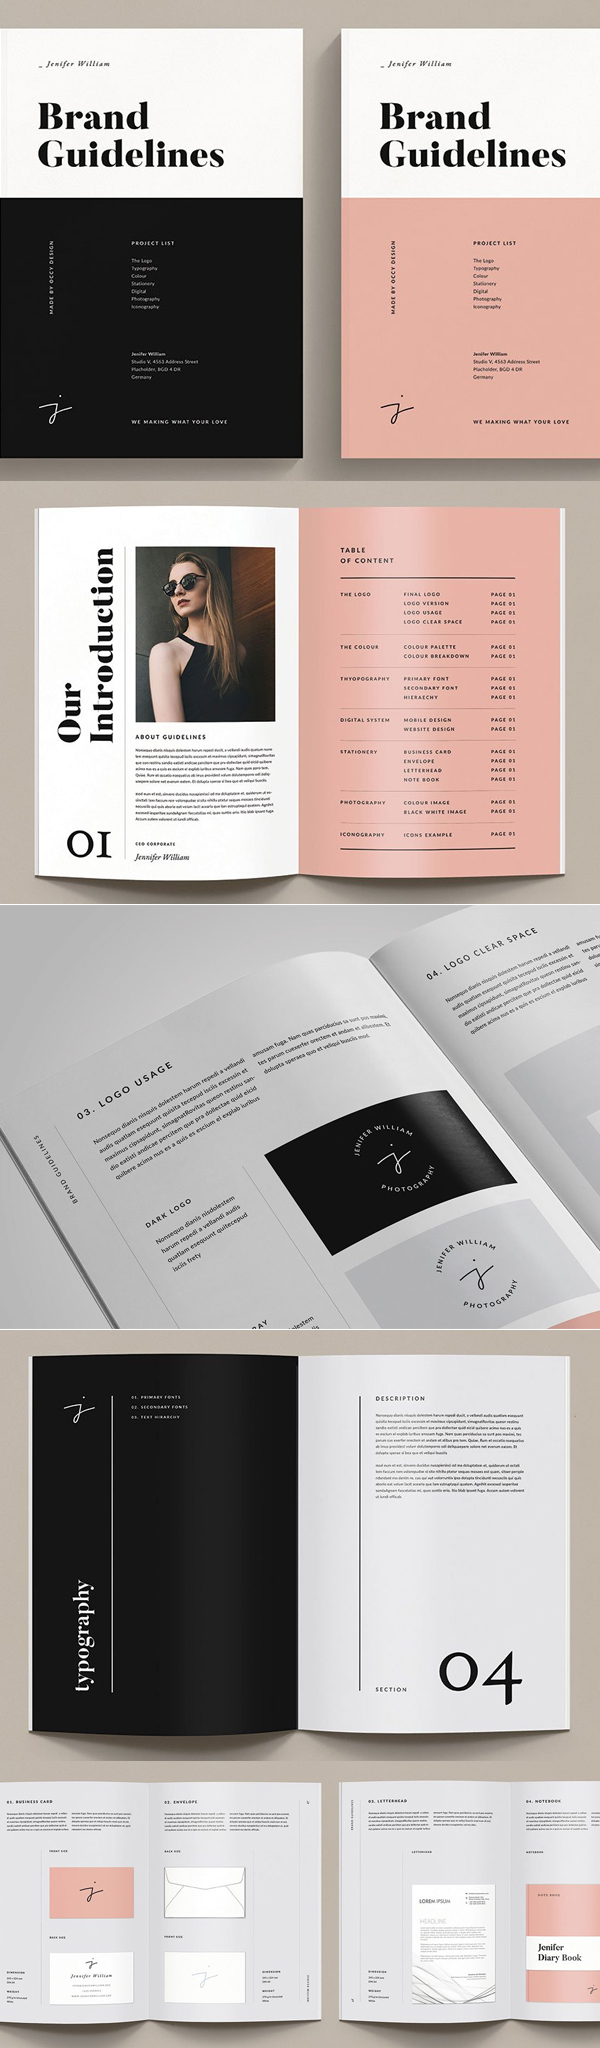 CLean Brand Guidelines